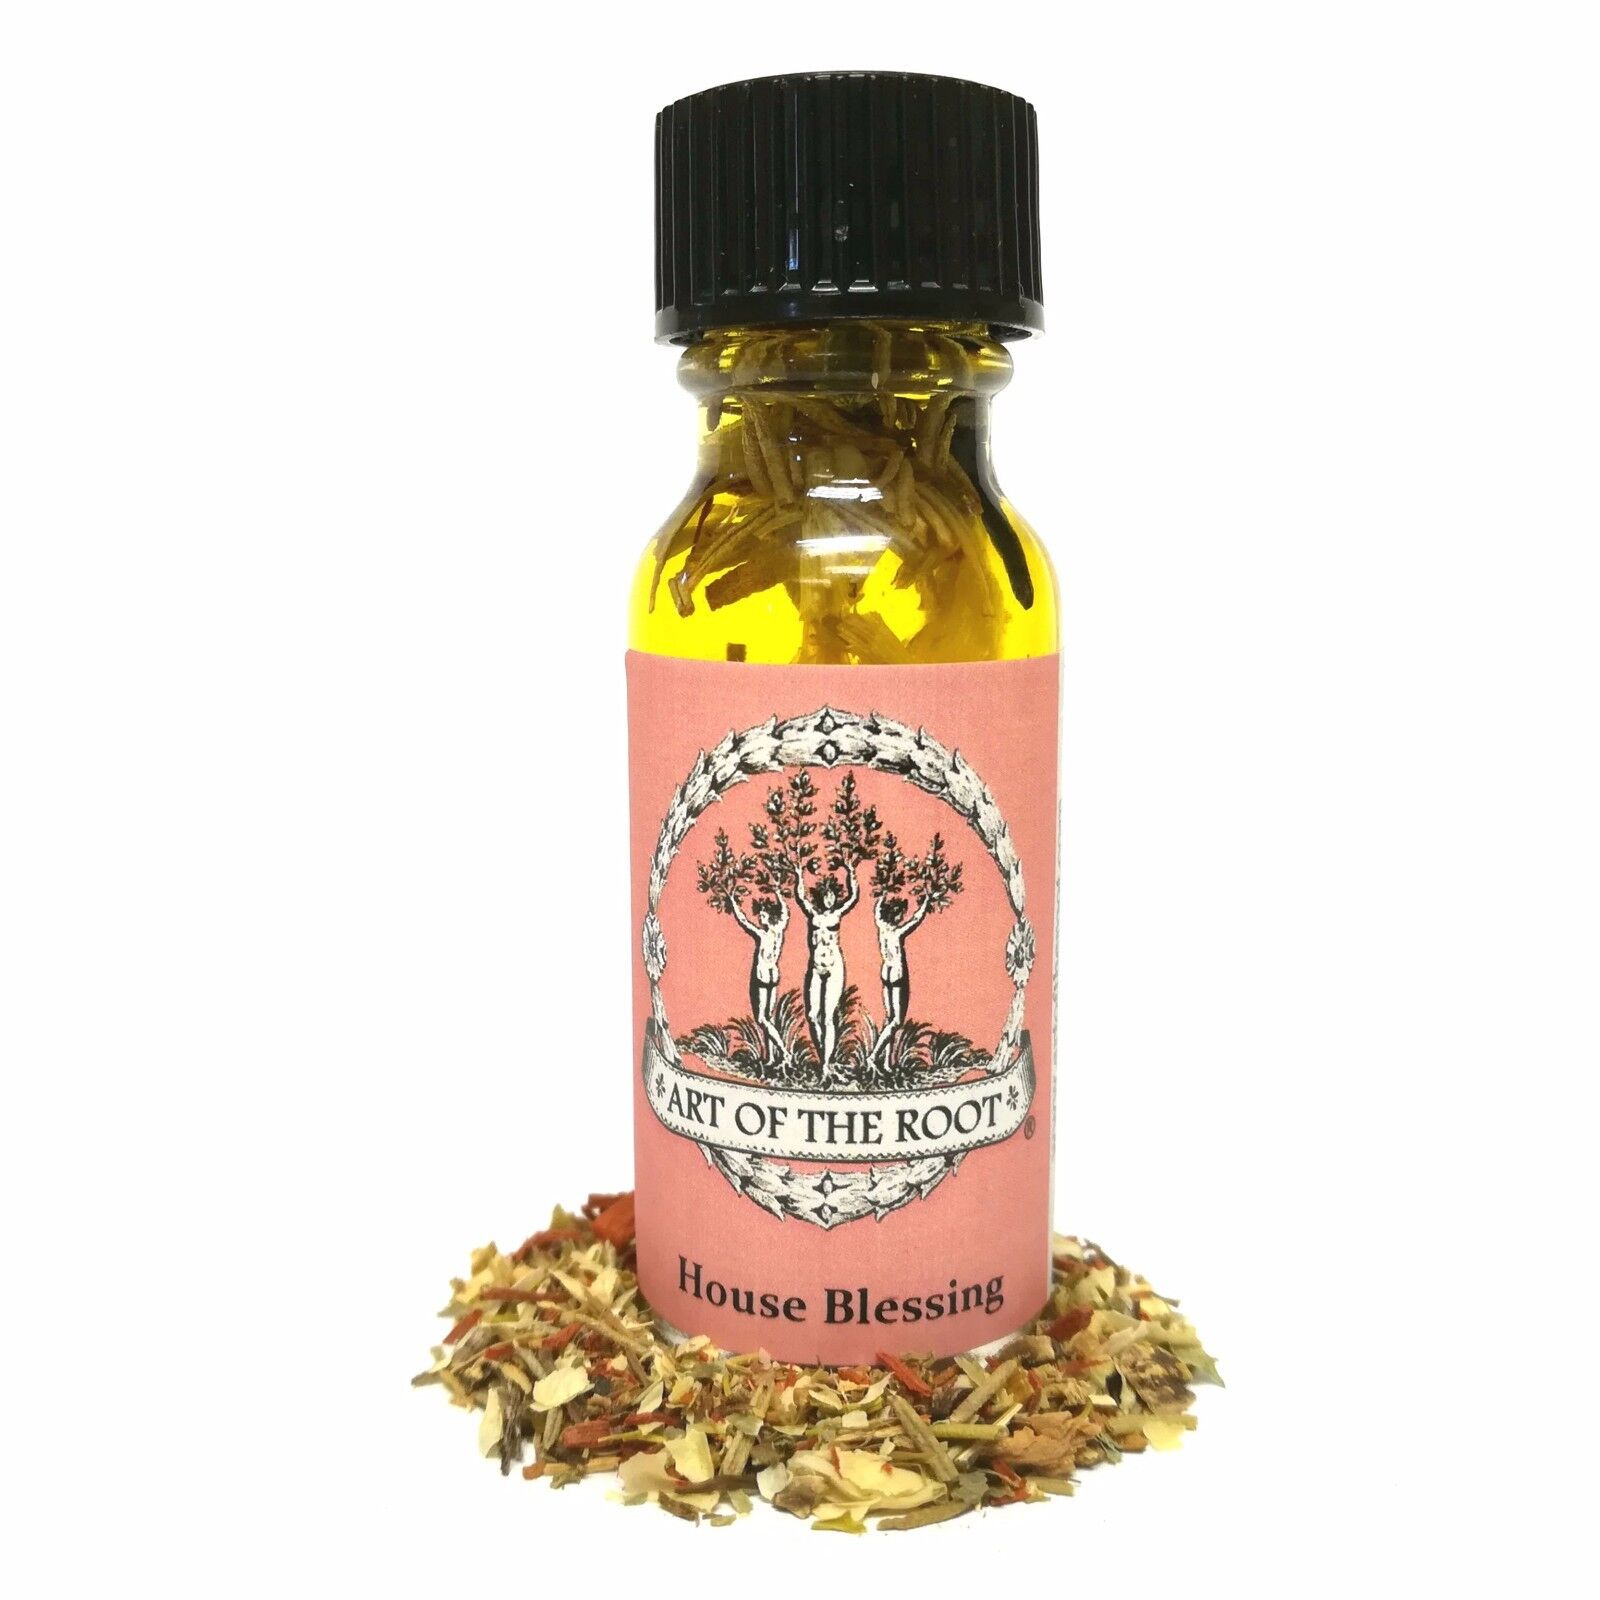 House Blessing Oil Good Fortune, Blessings, Protection Hoodoo Voodoo Wicca Pagan